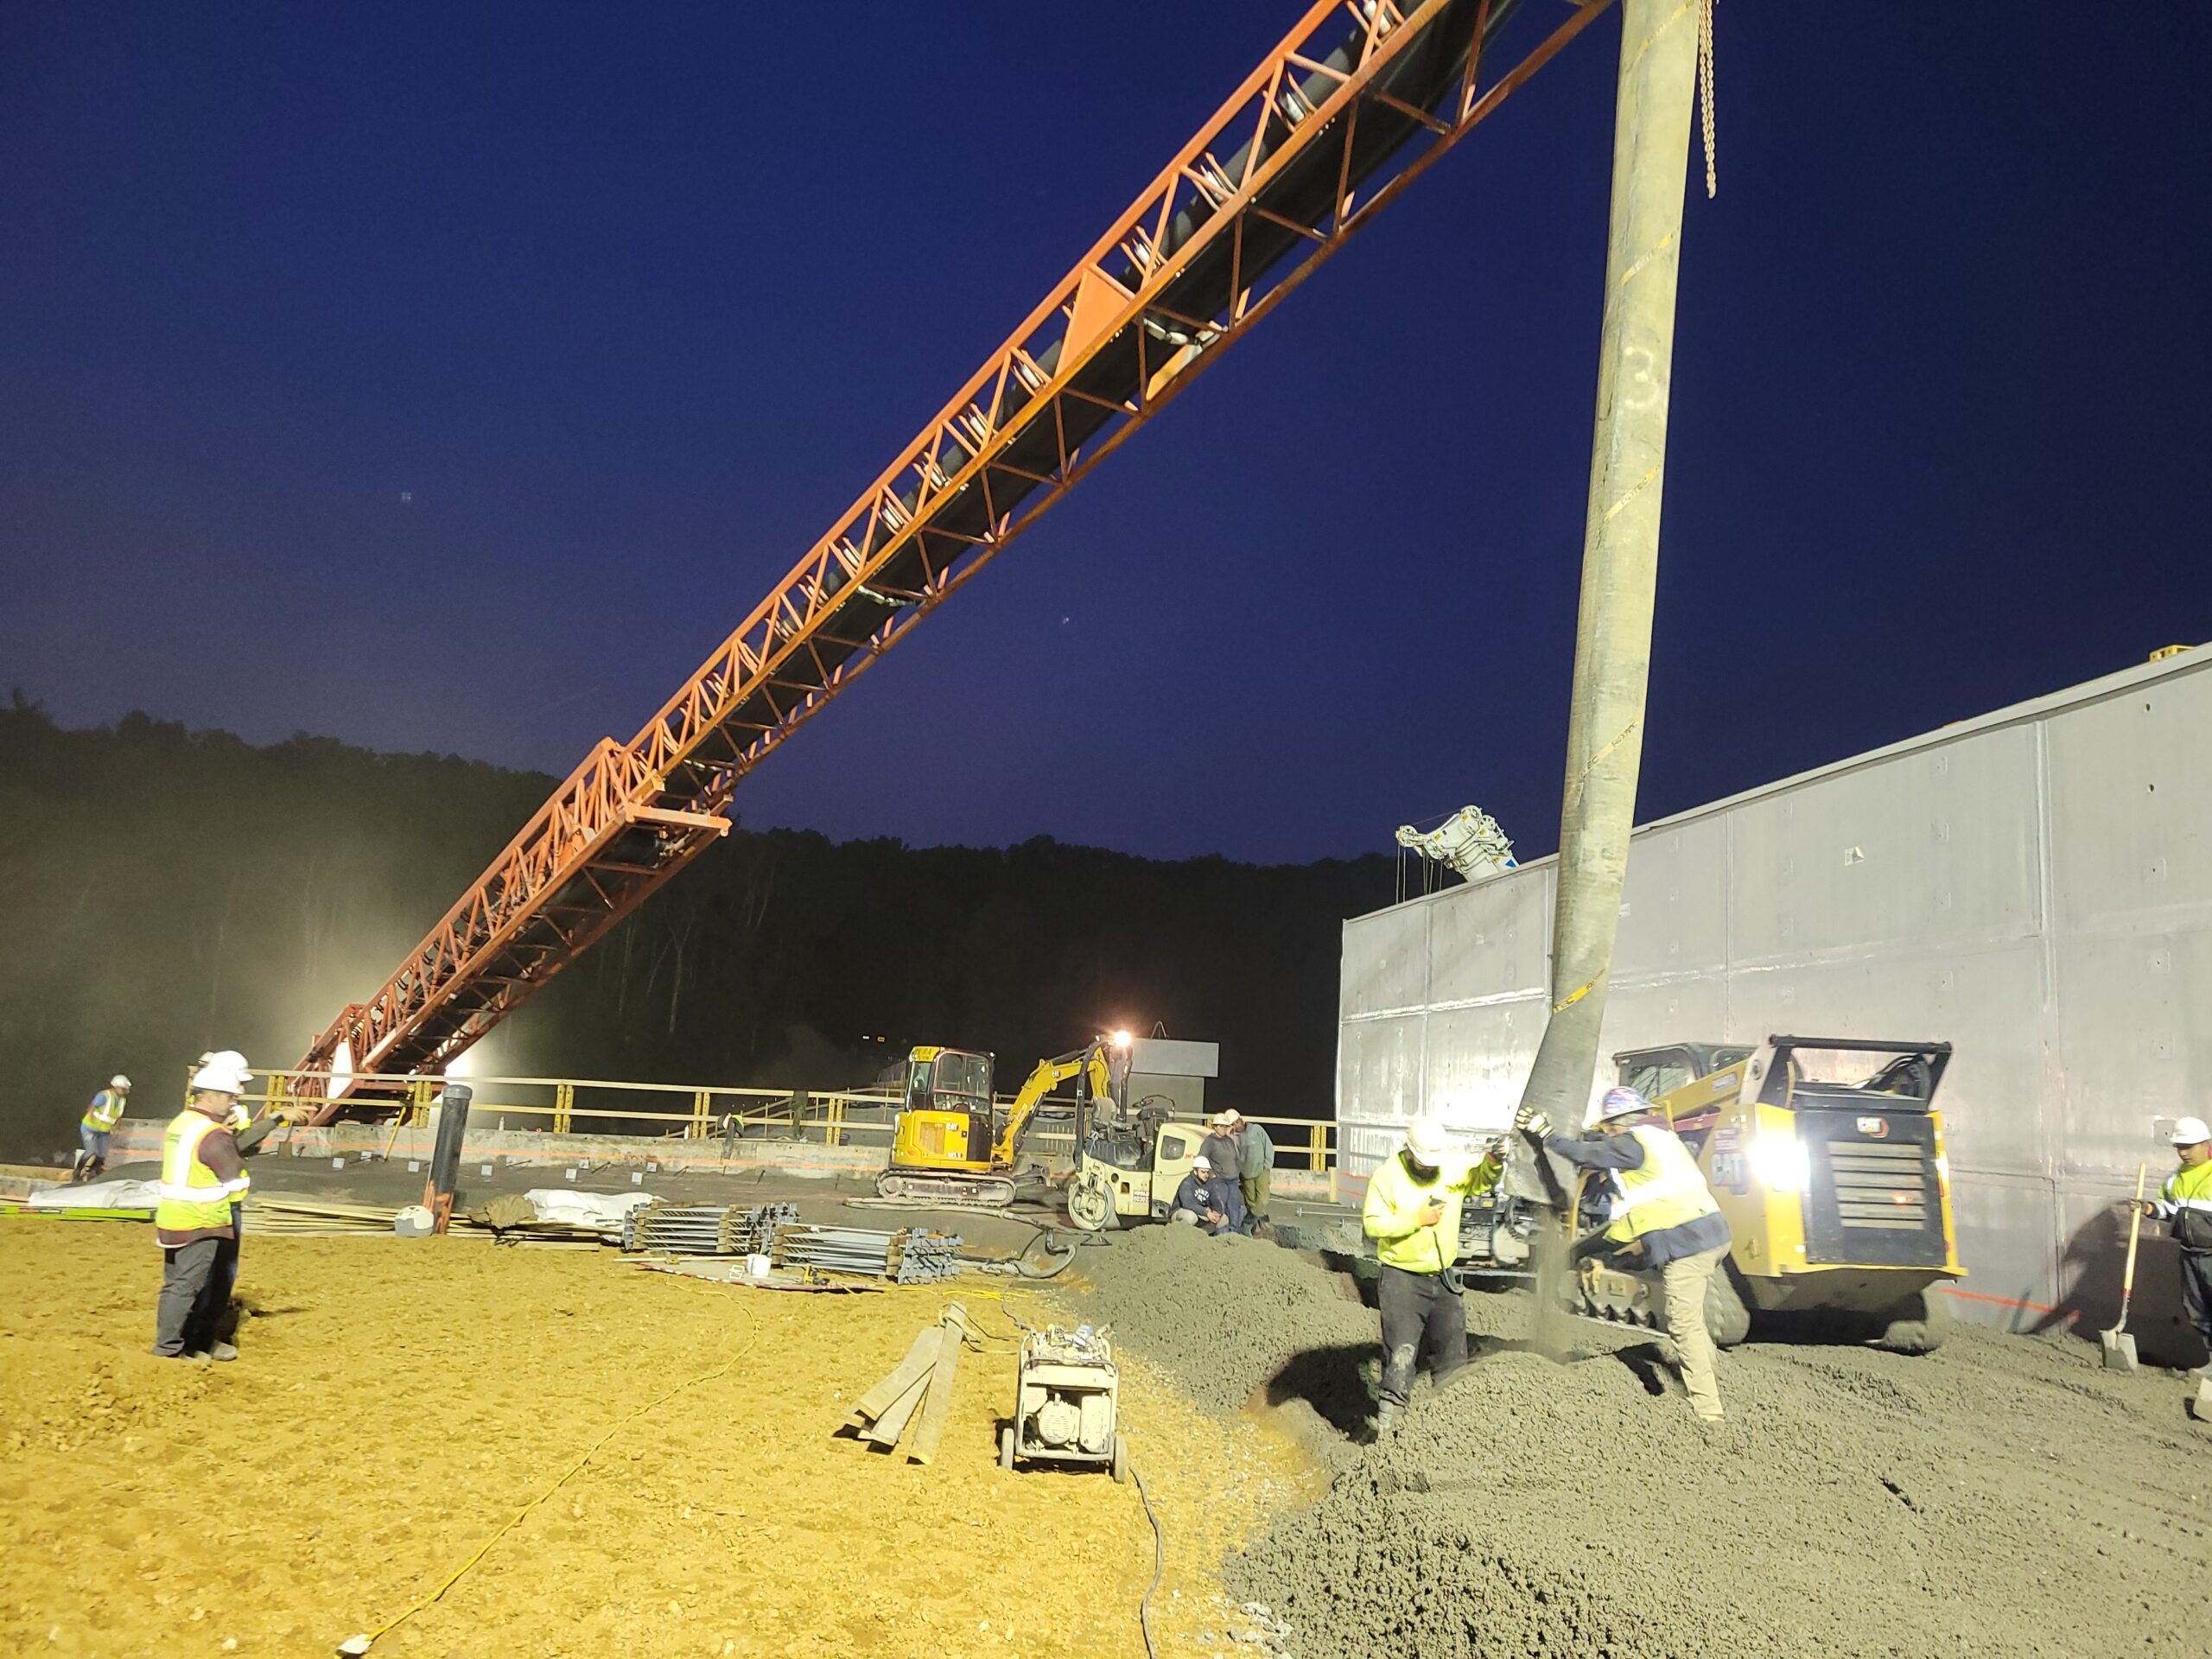 Pouring concrete at night for the Lake Williams Dam.